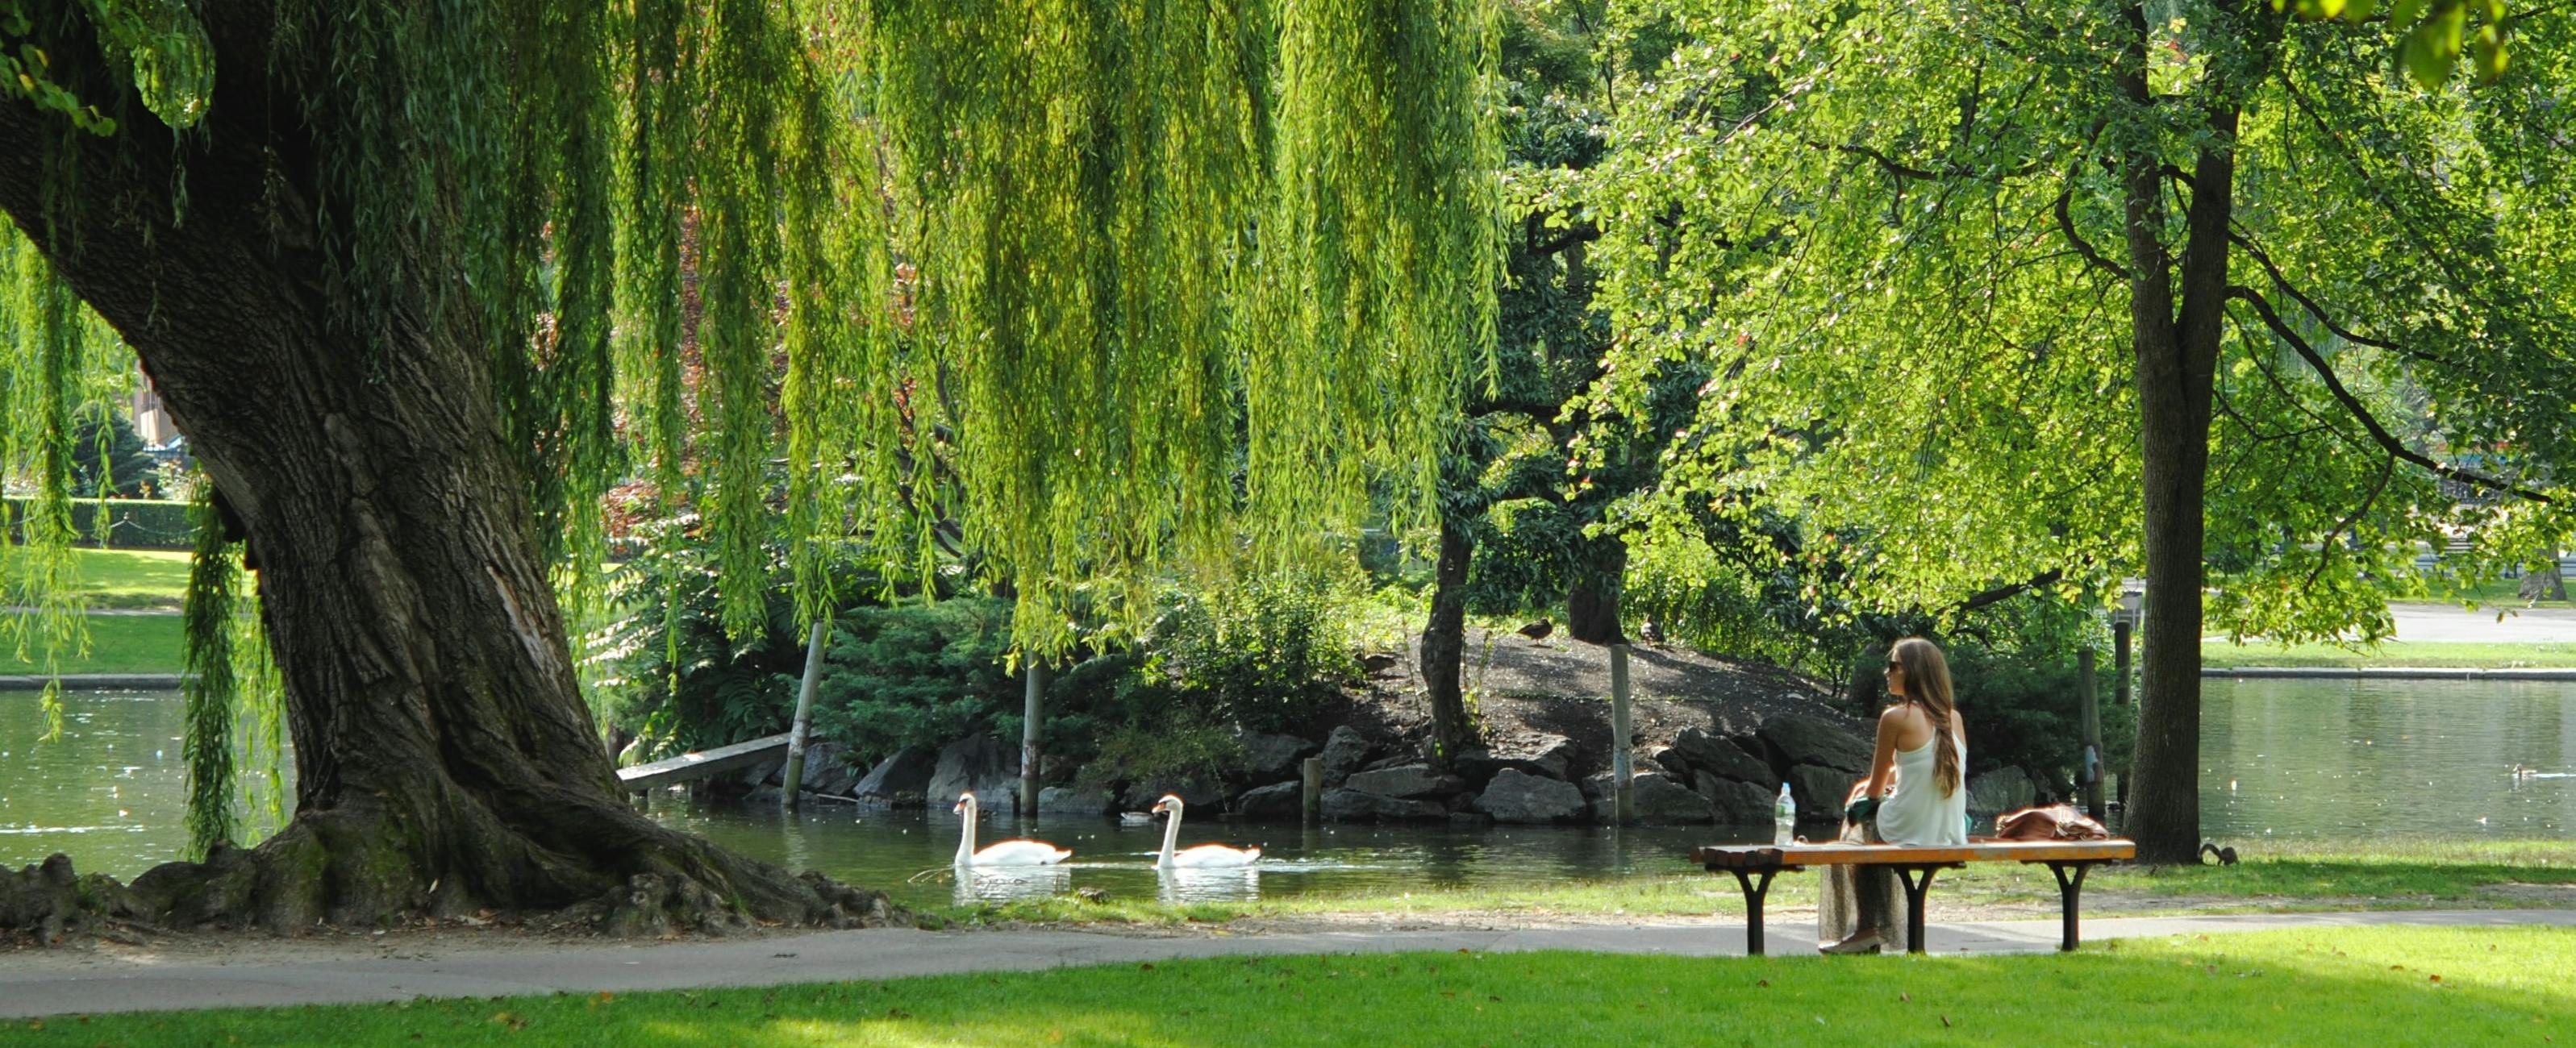 A woman in a white top sitting on a park bench under some trees next to a large pond where two swans are swimming